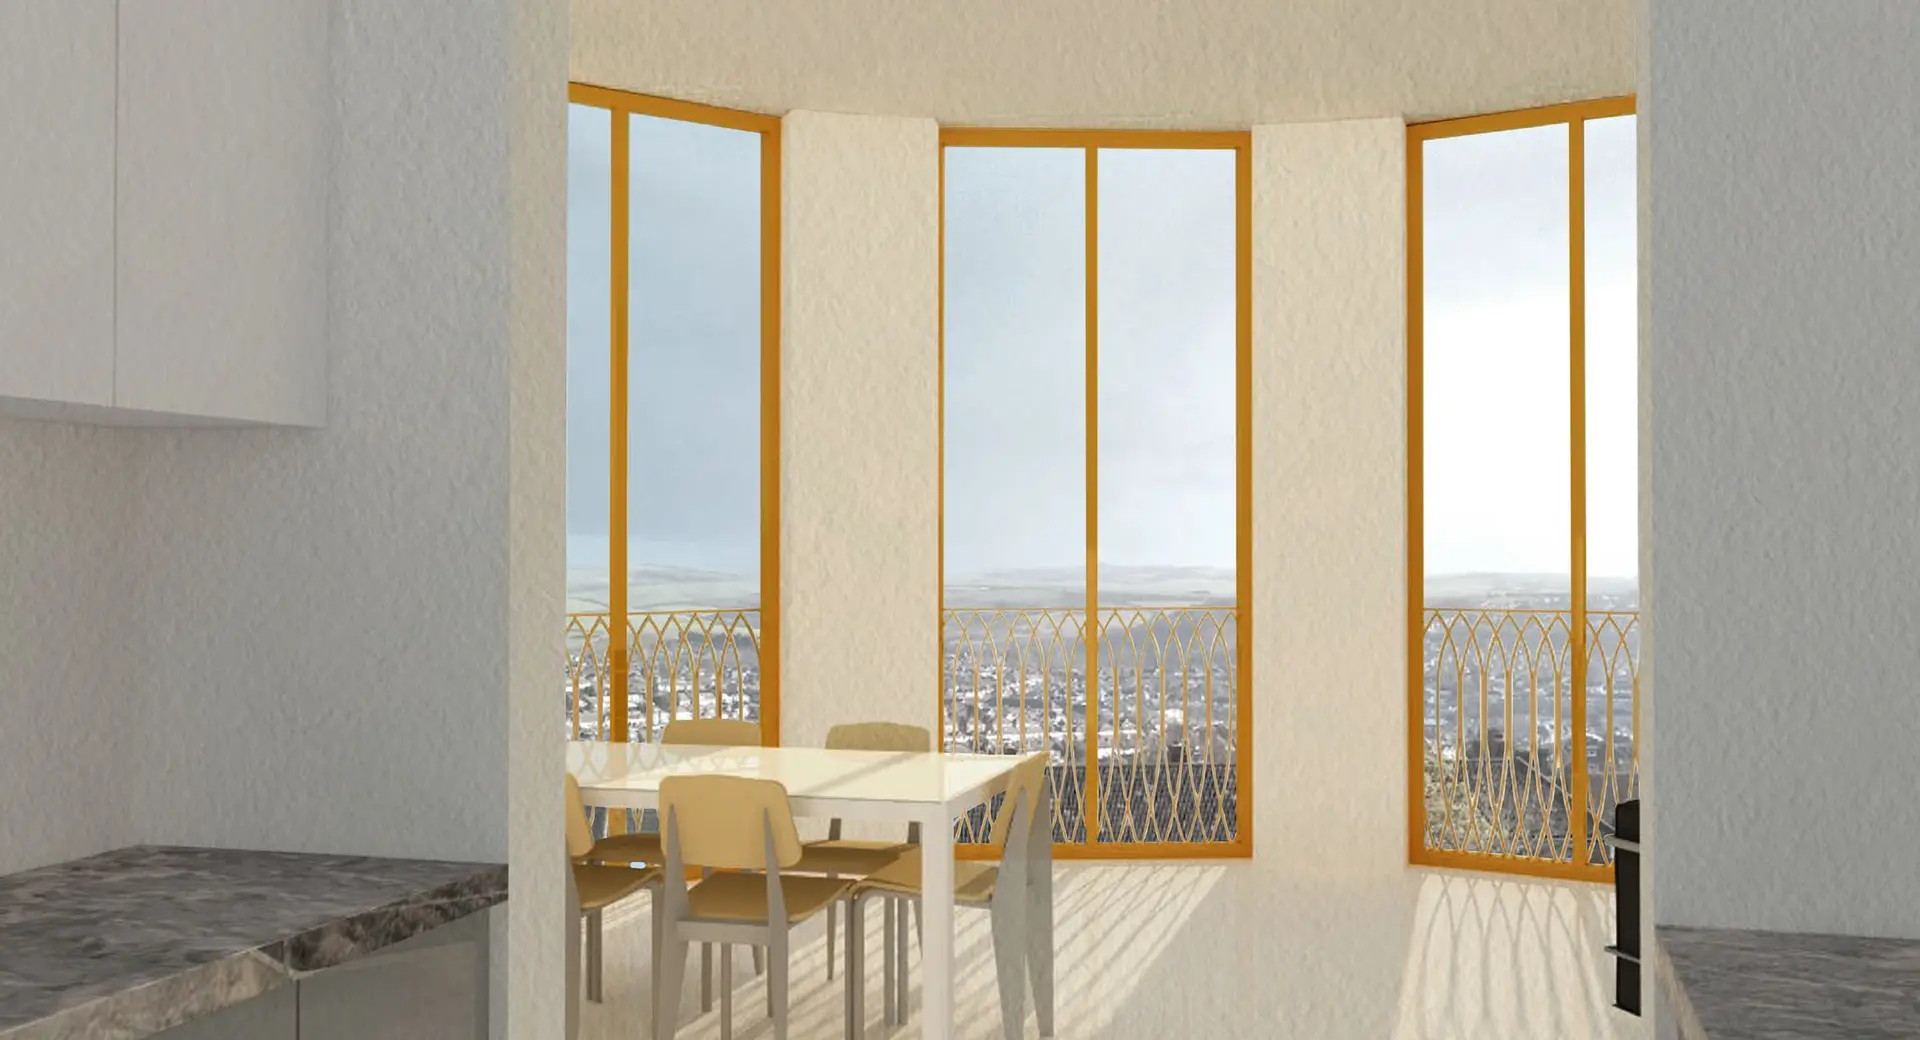 Interior view from flat, with views across the surrounding houses to the sea and Downs